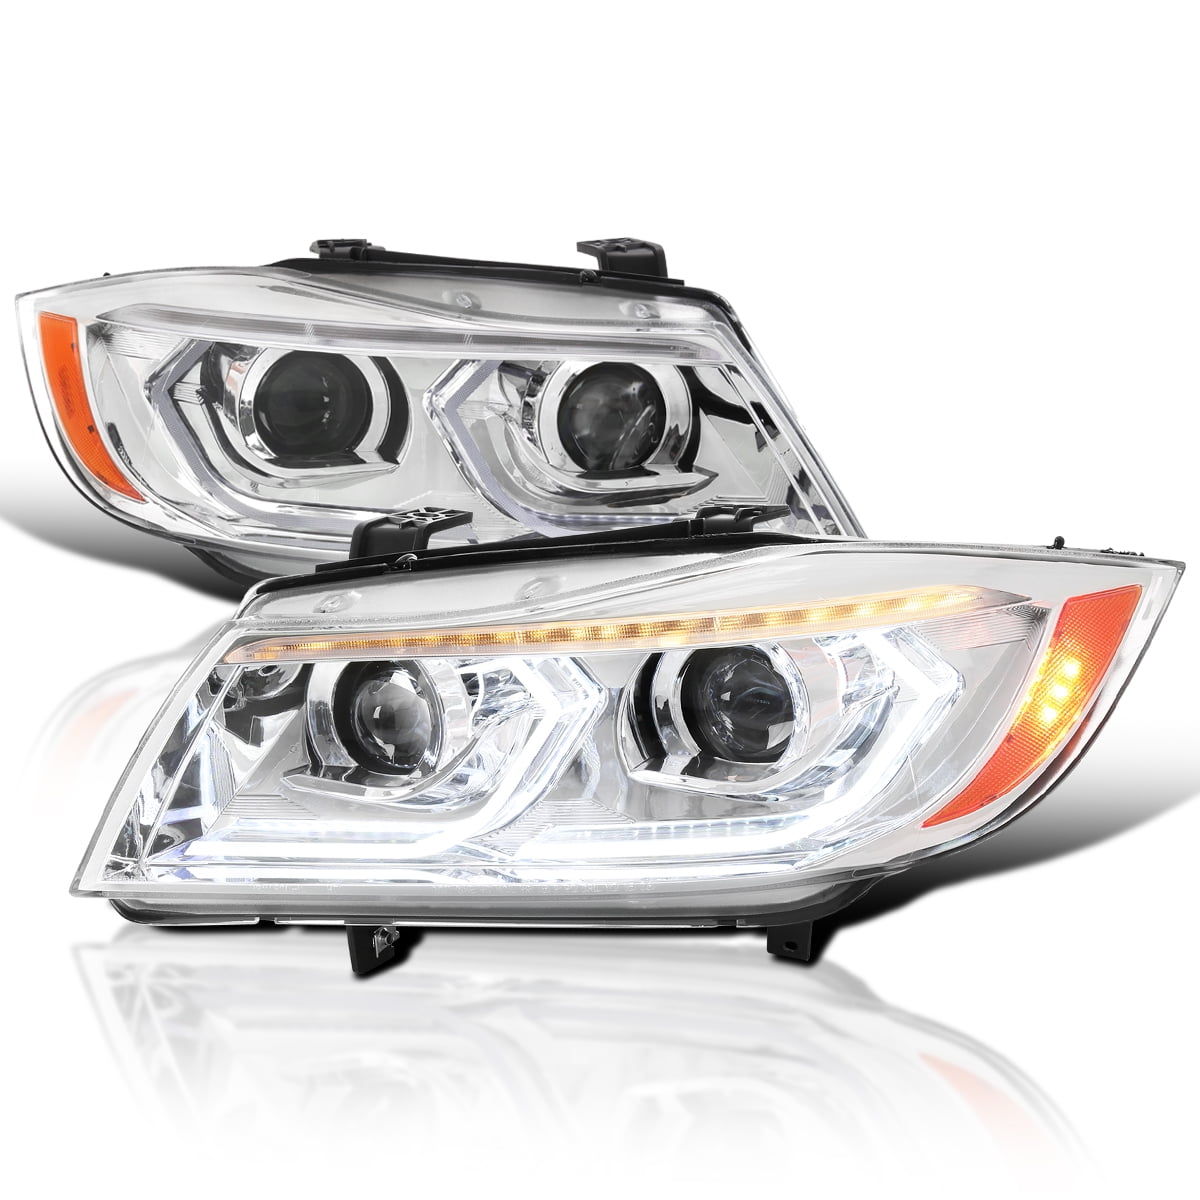  Spec-D Tuning Dual Projector Headlights with 3D LED Tube  Compatible with 2006-2011 BMW 3-Series E90 Sedan and E91 Wagon Left + Right  Pair Headlamps Assembly : Automotive